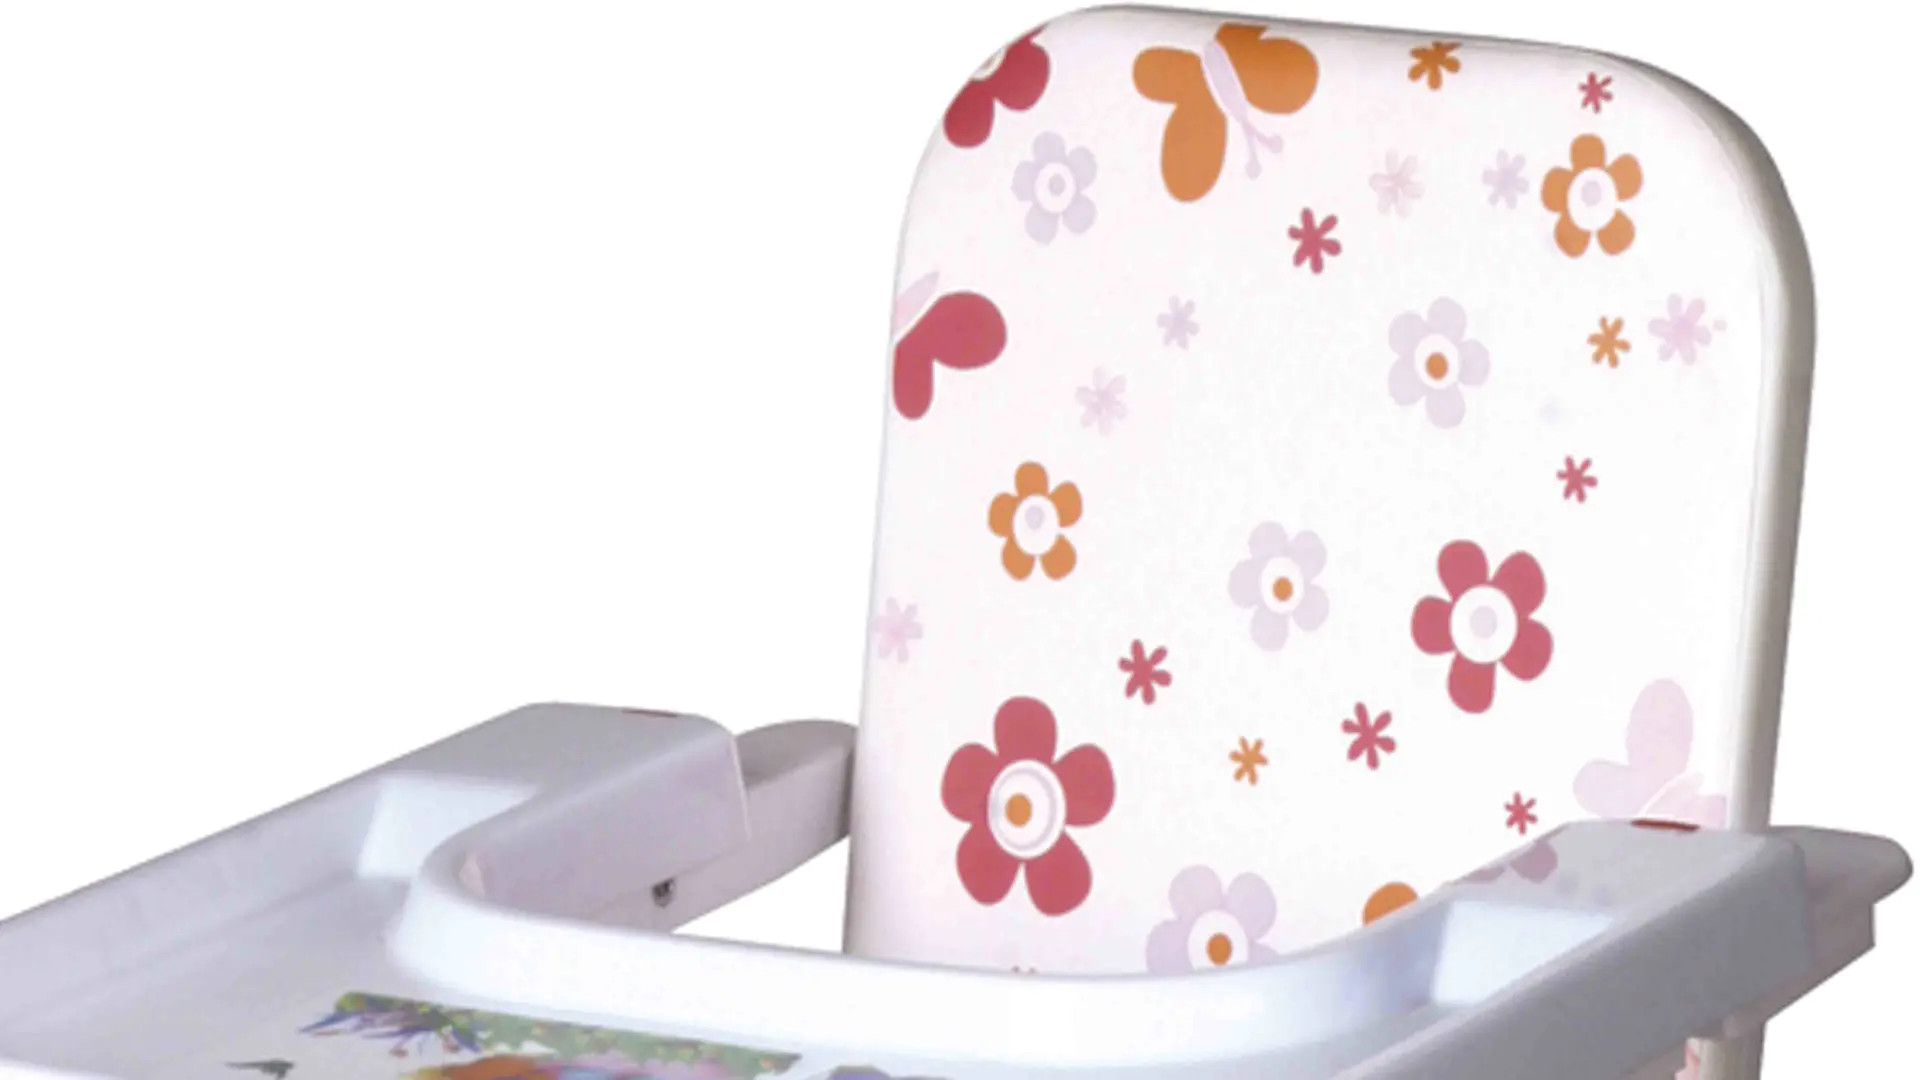 Aoqi plastic adjustable high chair for babies customized for infant